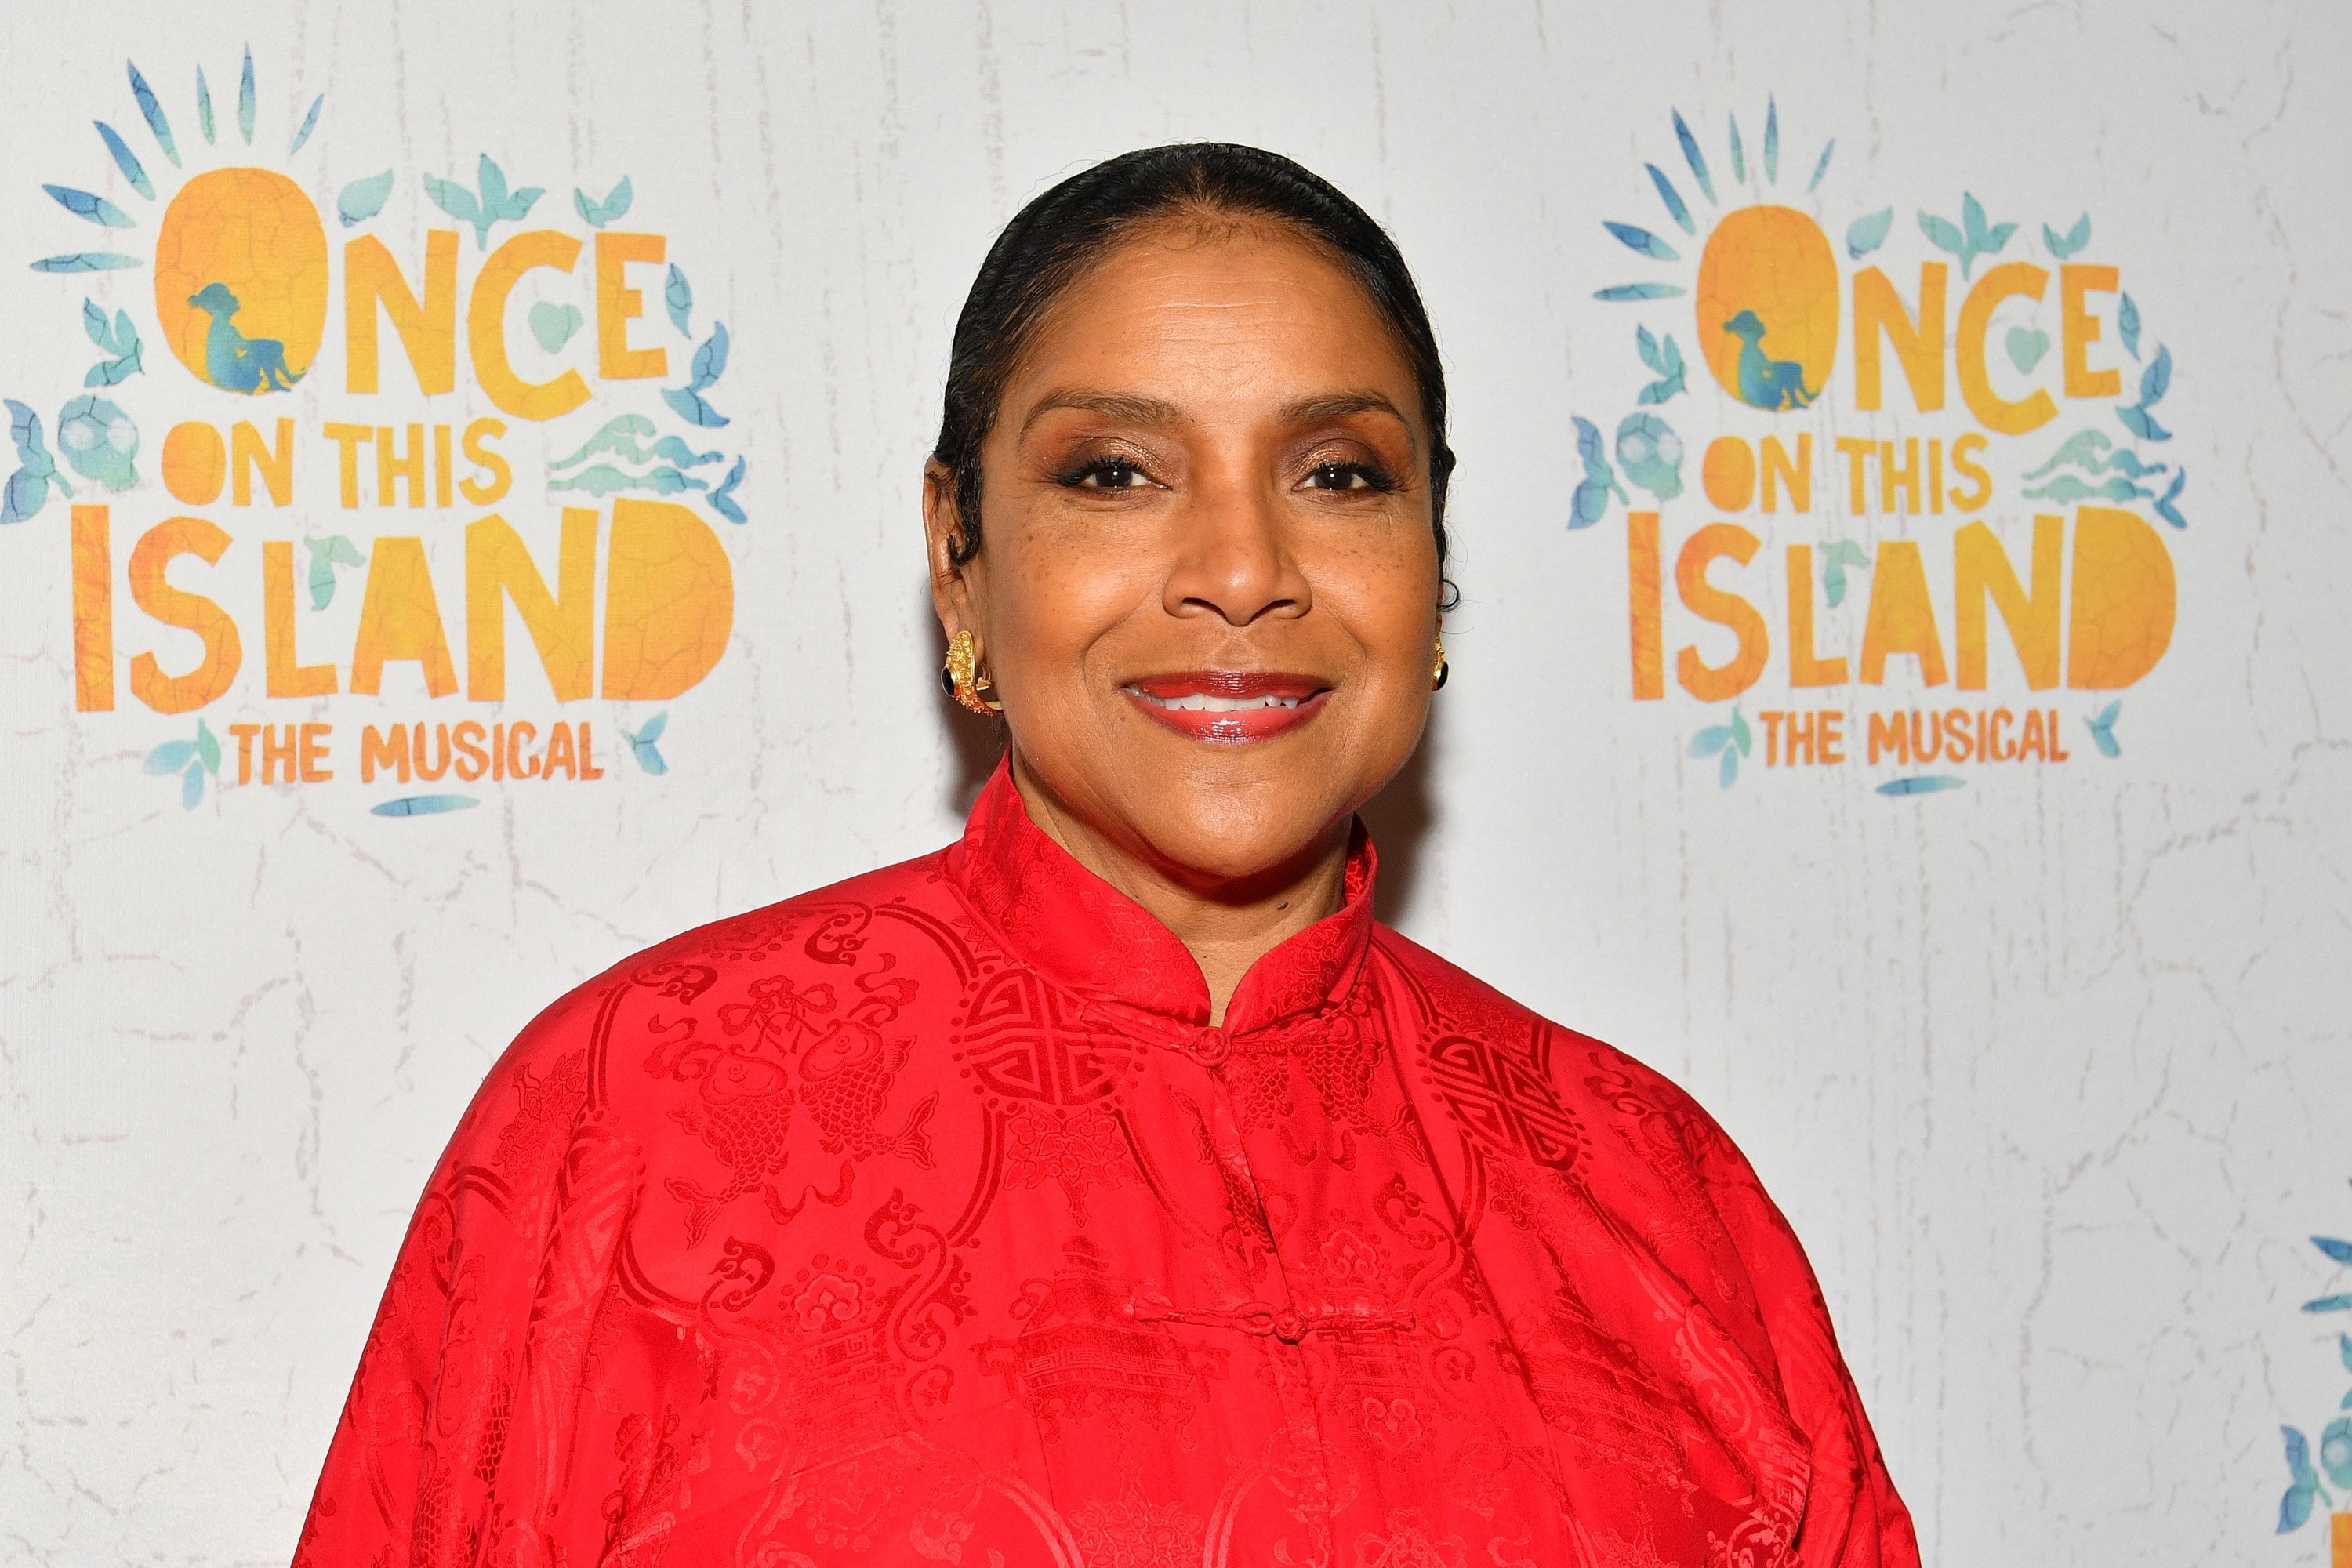 Phylicia Rashad attends the "Once On This Island" Broadway Opening Night at Circle in the Square Theatre on December 3, 2017 | Photo: GettyImages